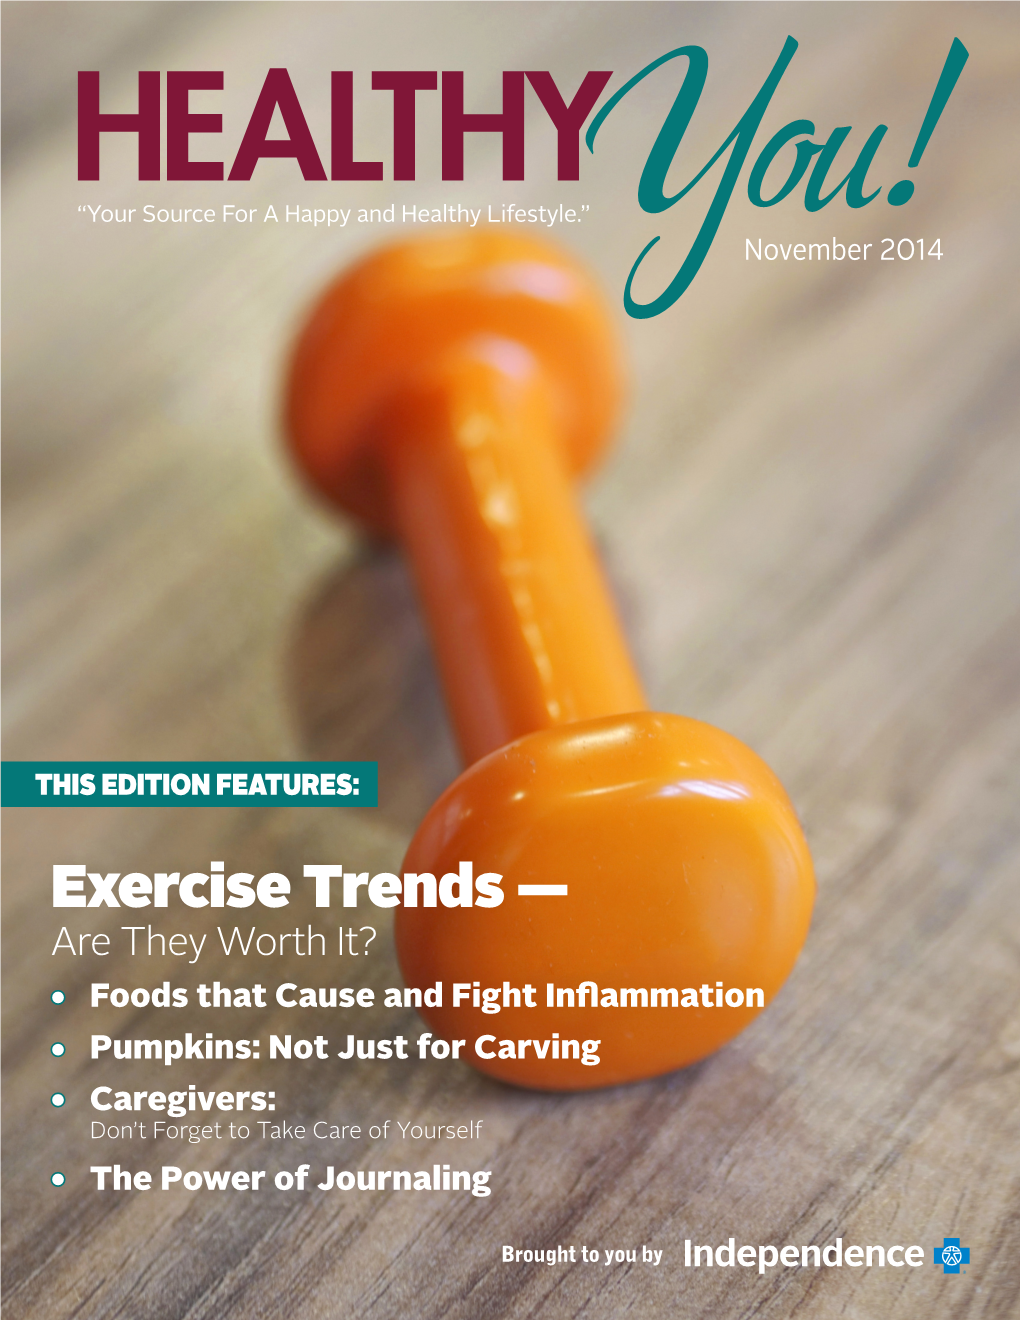 Exercise Trends —